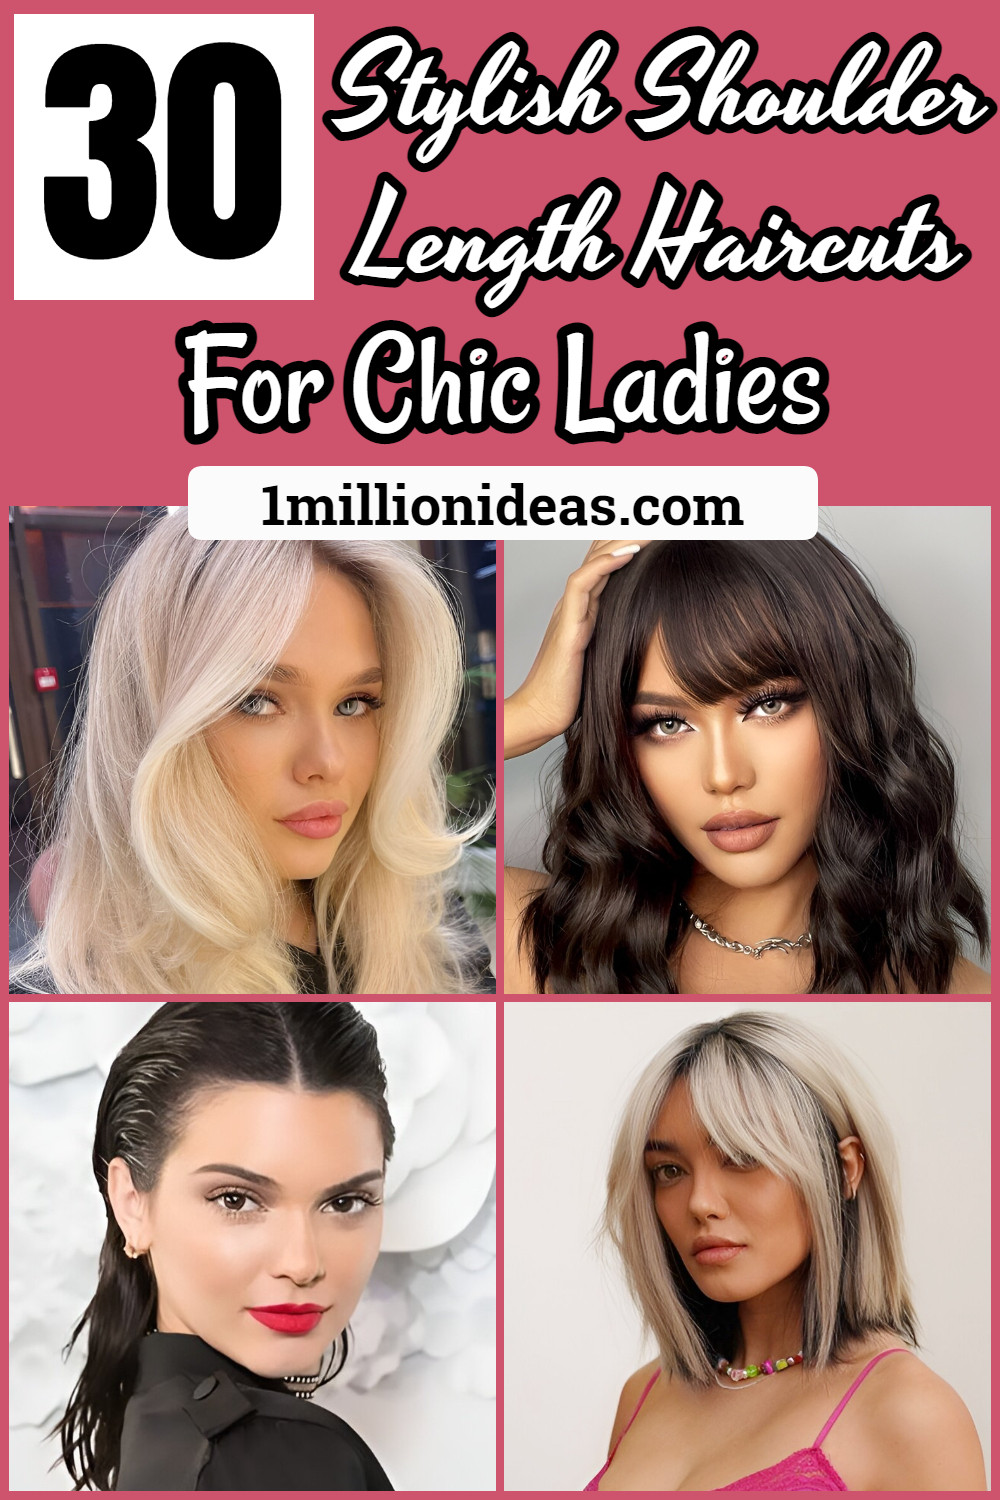 30 Stylish Shoulder Length Haircuts For Chic Ladies - 191